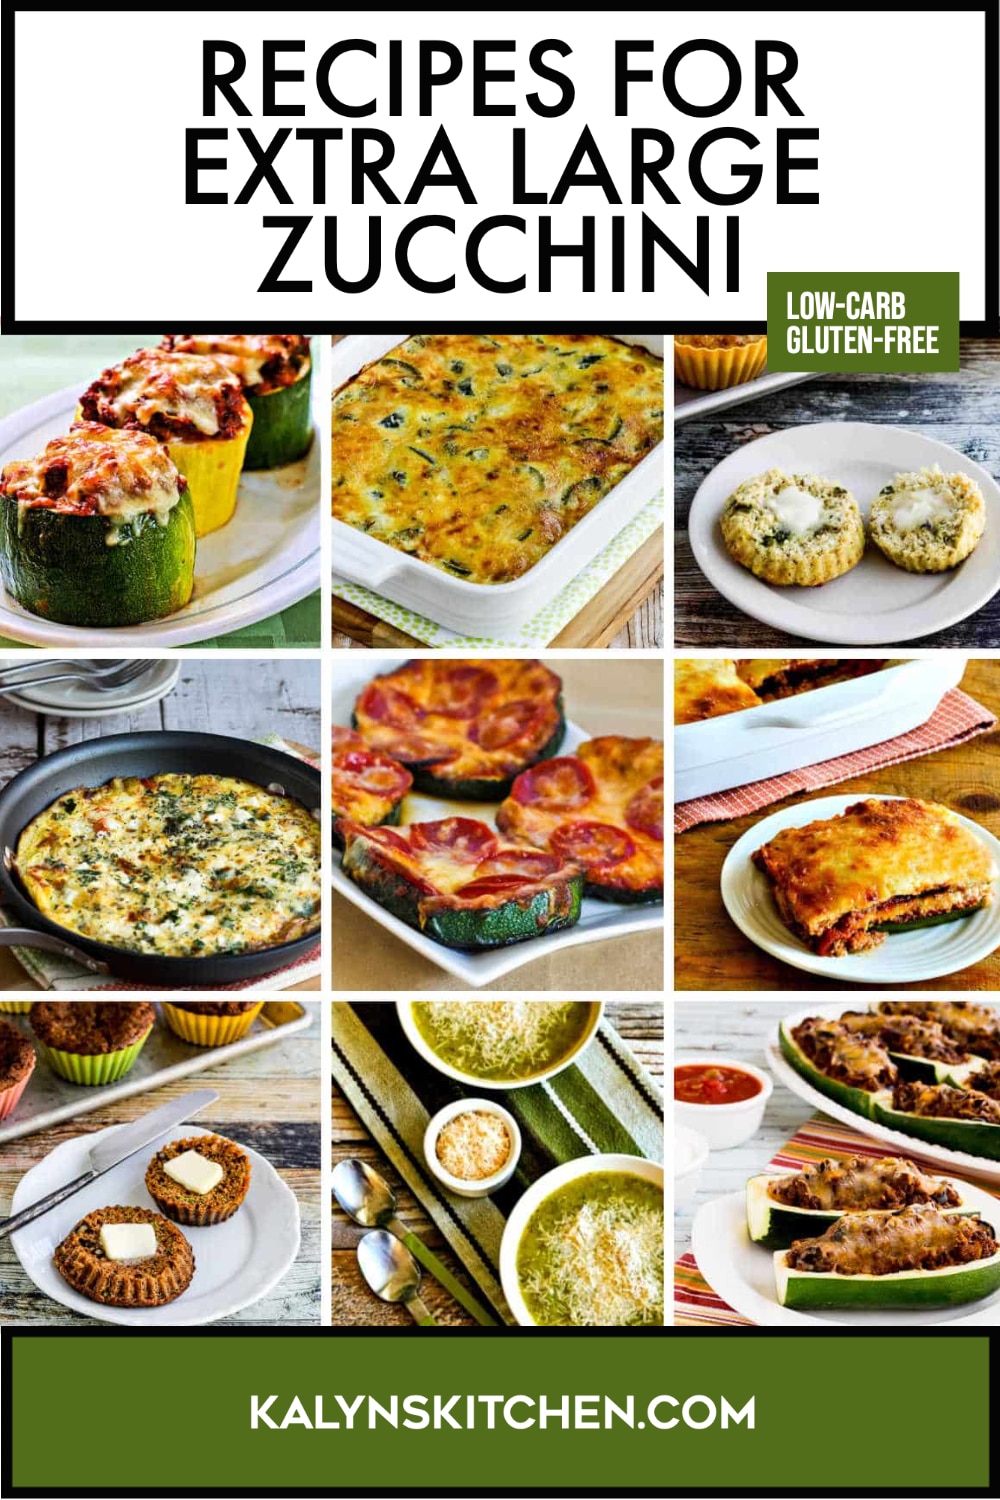 Pinterest image of Recipes for Extra Large Zucchini